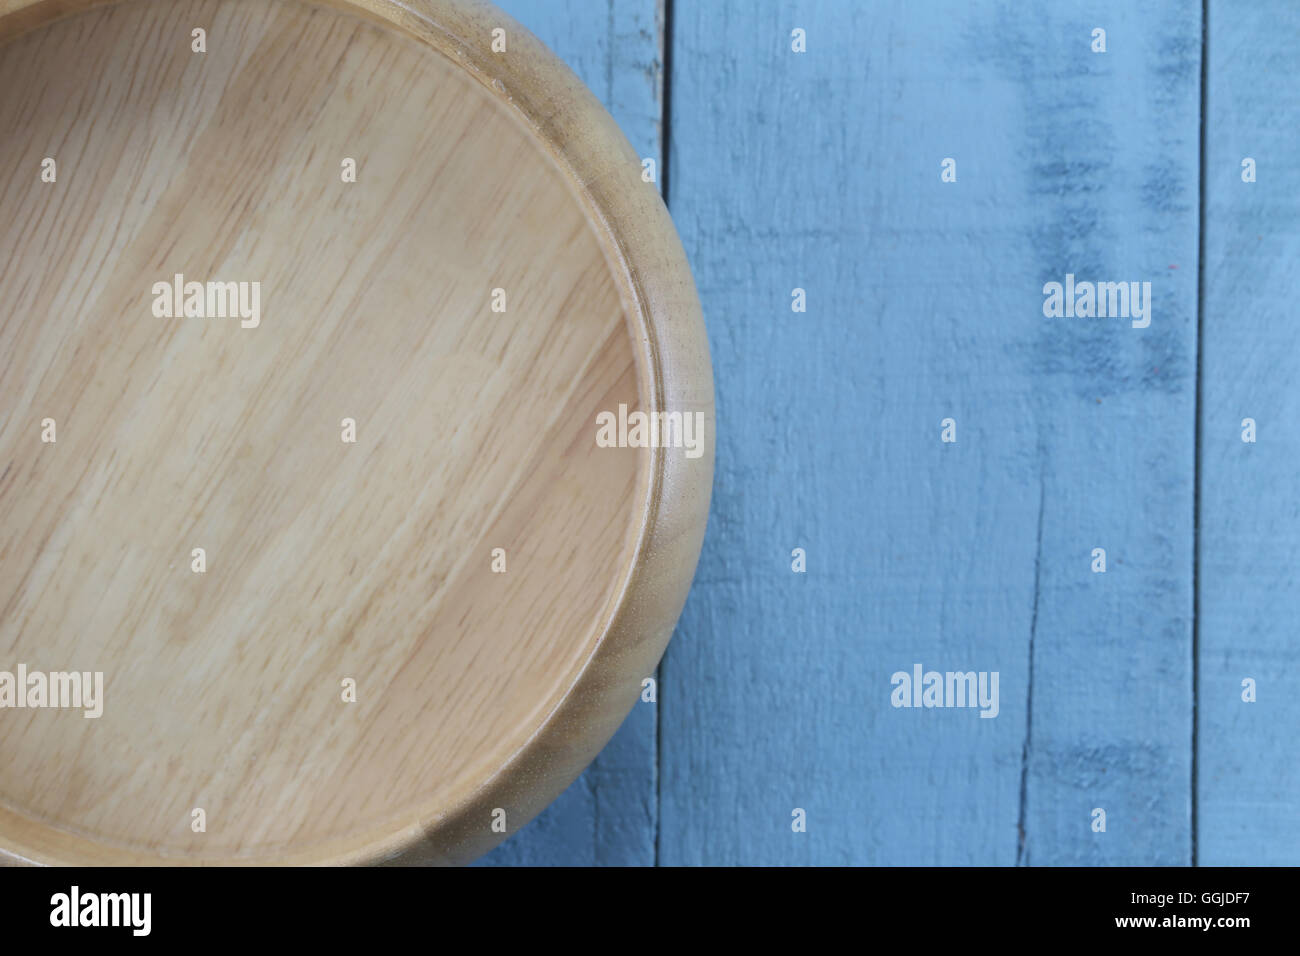 Wooden bowl of Kitchen utensils on the blue wood background. Stock Photo